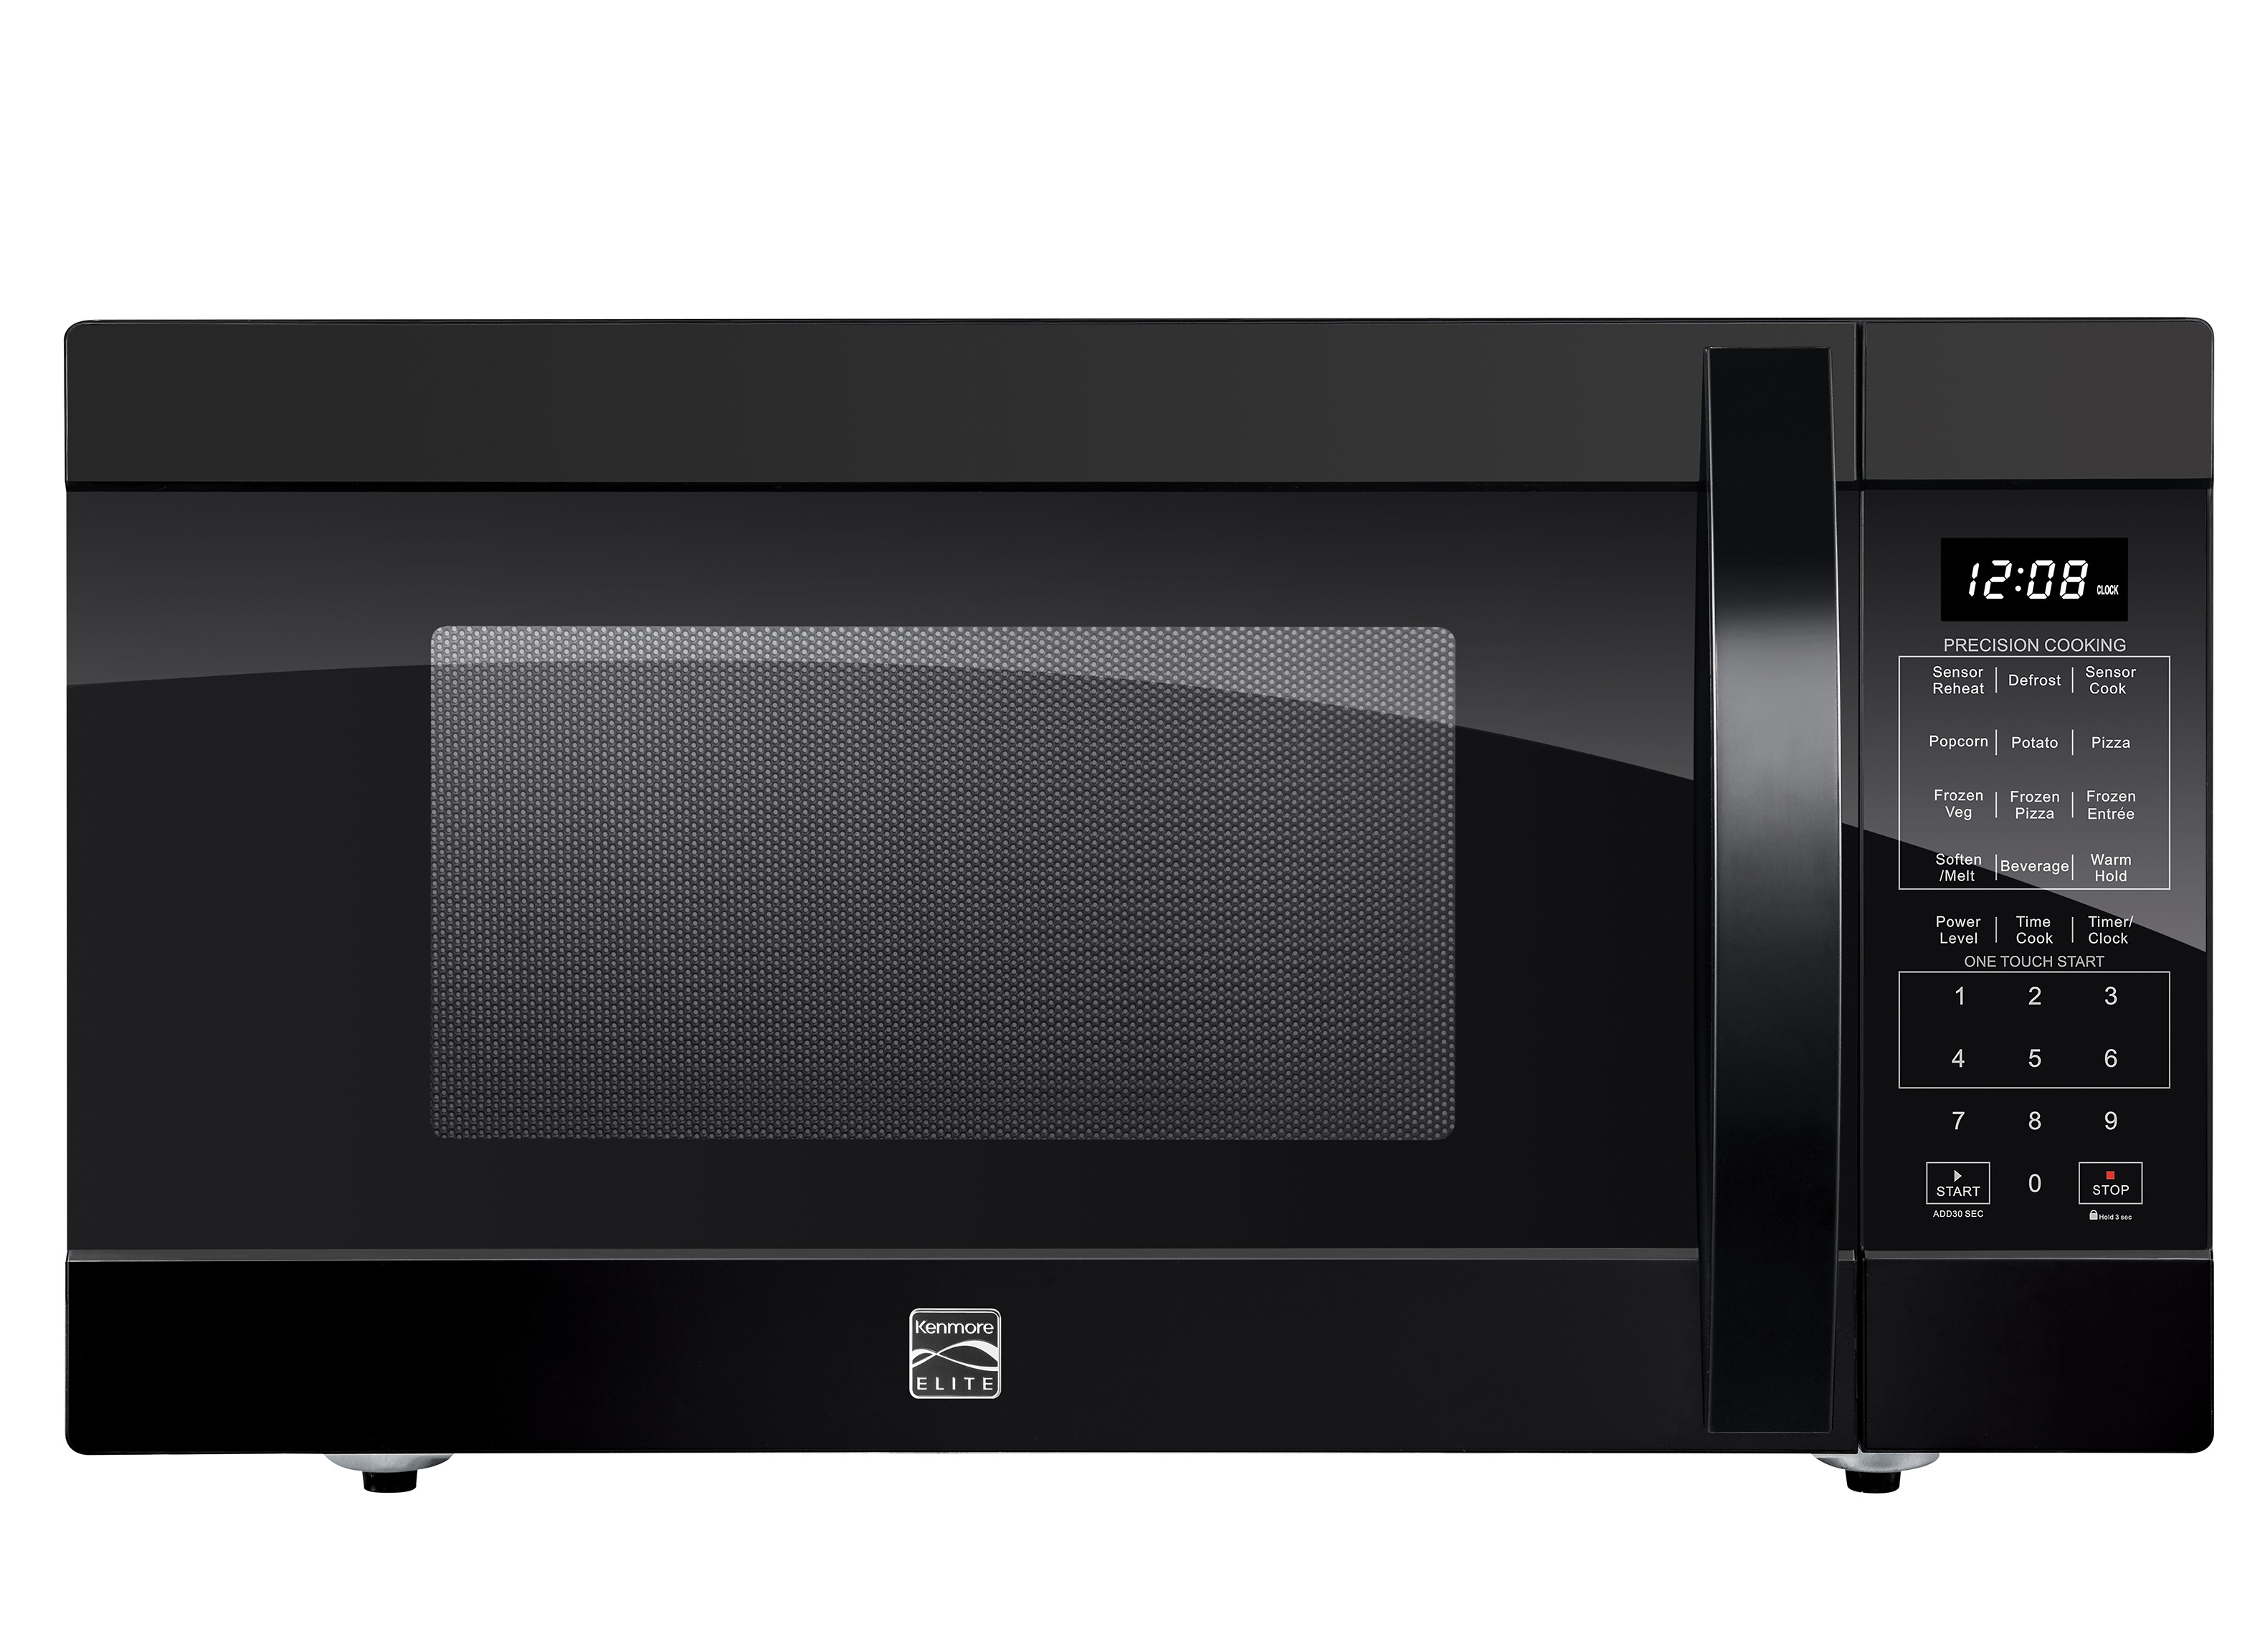 Kenmore Elite 75153 Microwave Oven Review - Consumer Reports